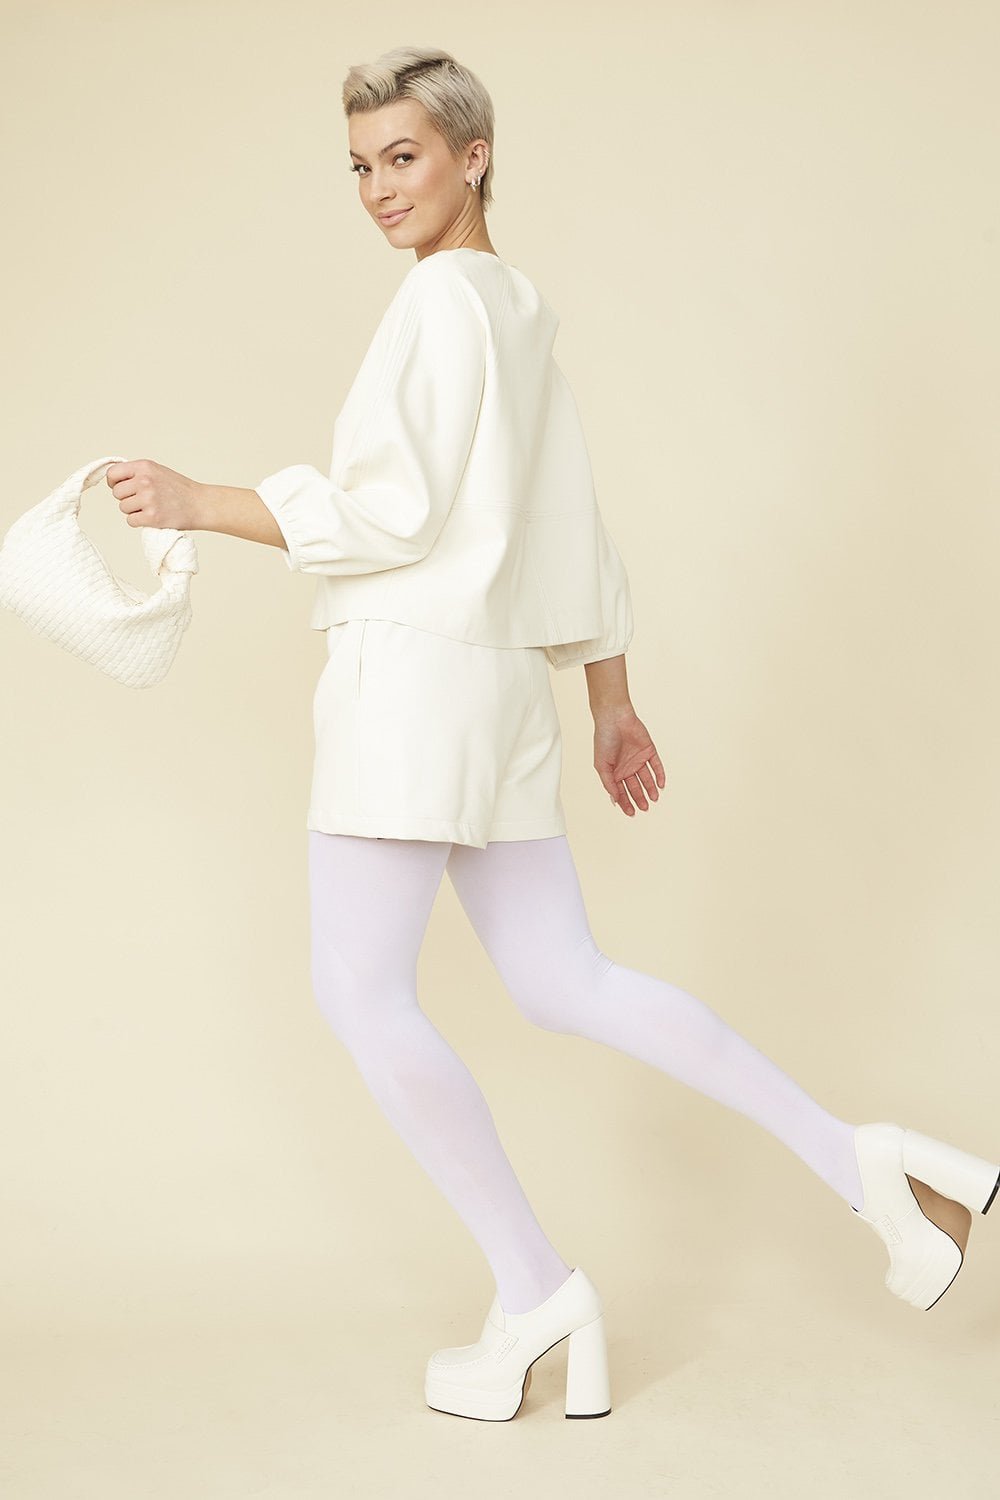 Shop Lux White Tencel Blend Eco Leather Shorts and women's luxury and designer clothes at www.lux-apparel.co.uk